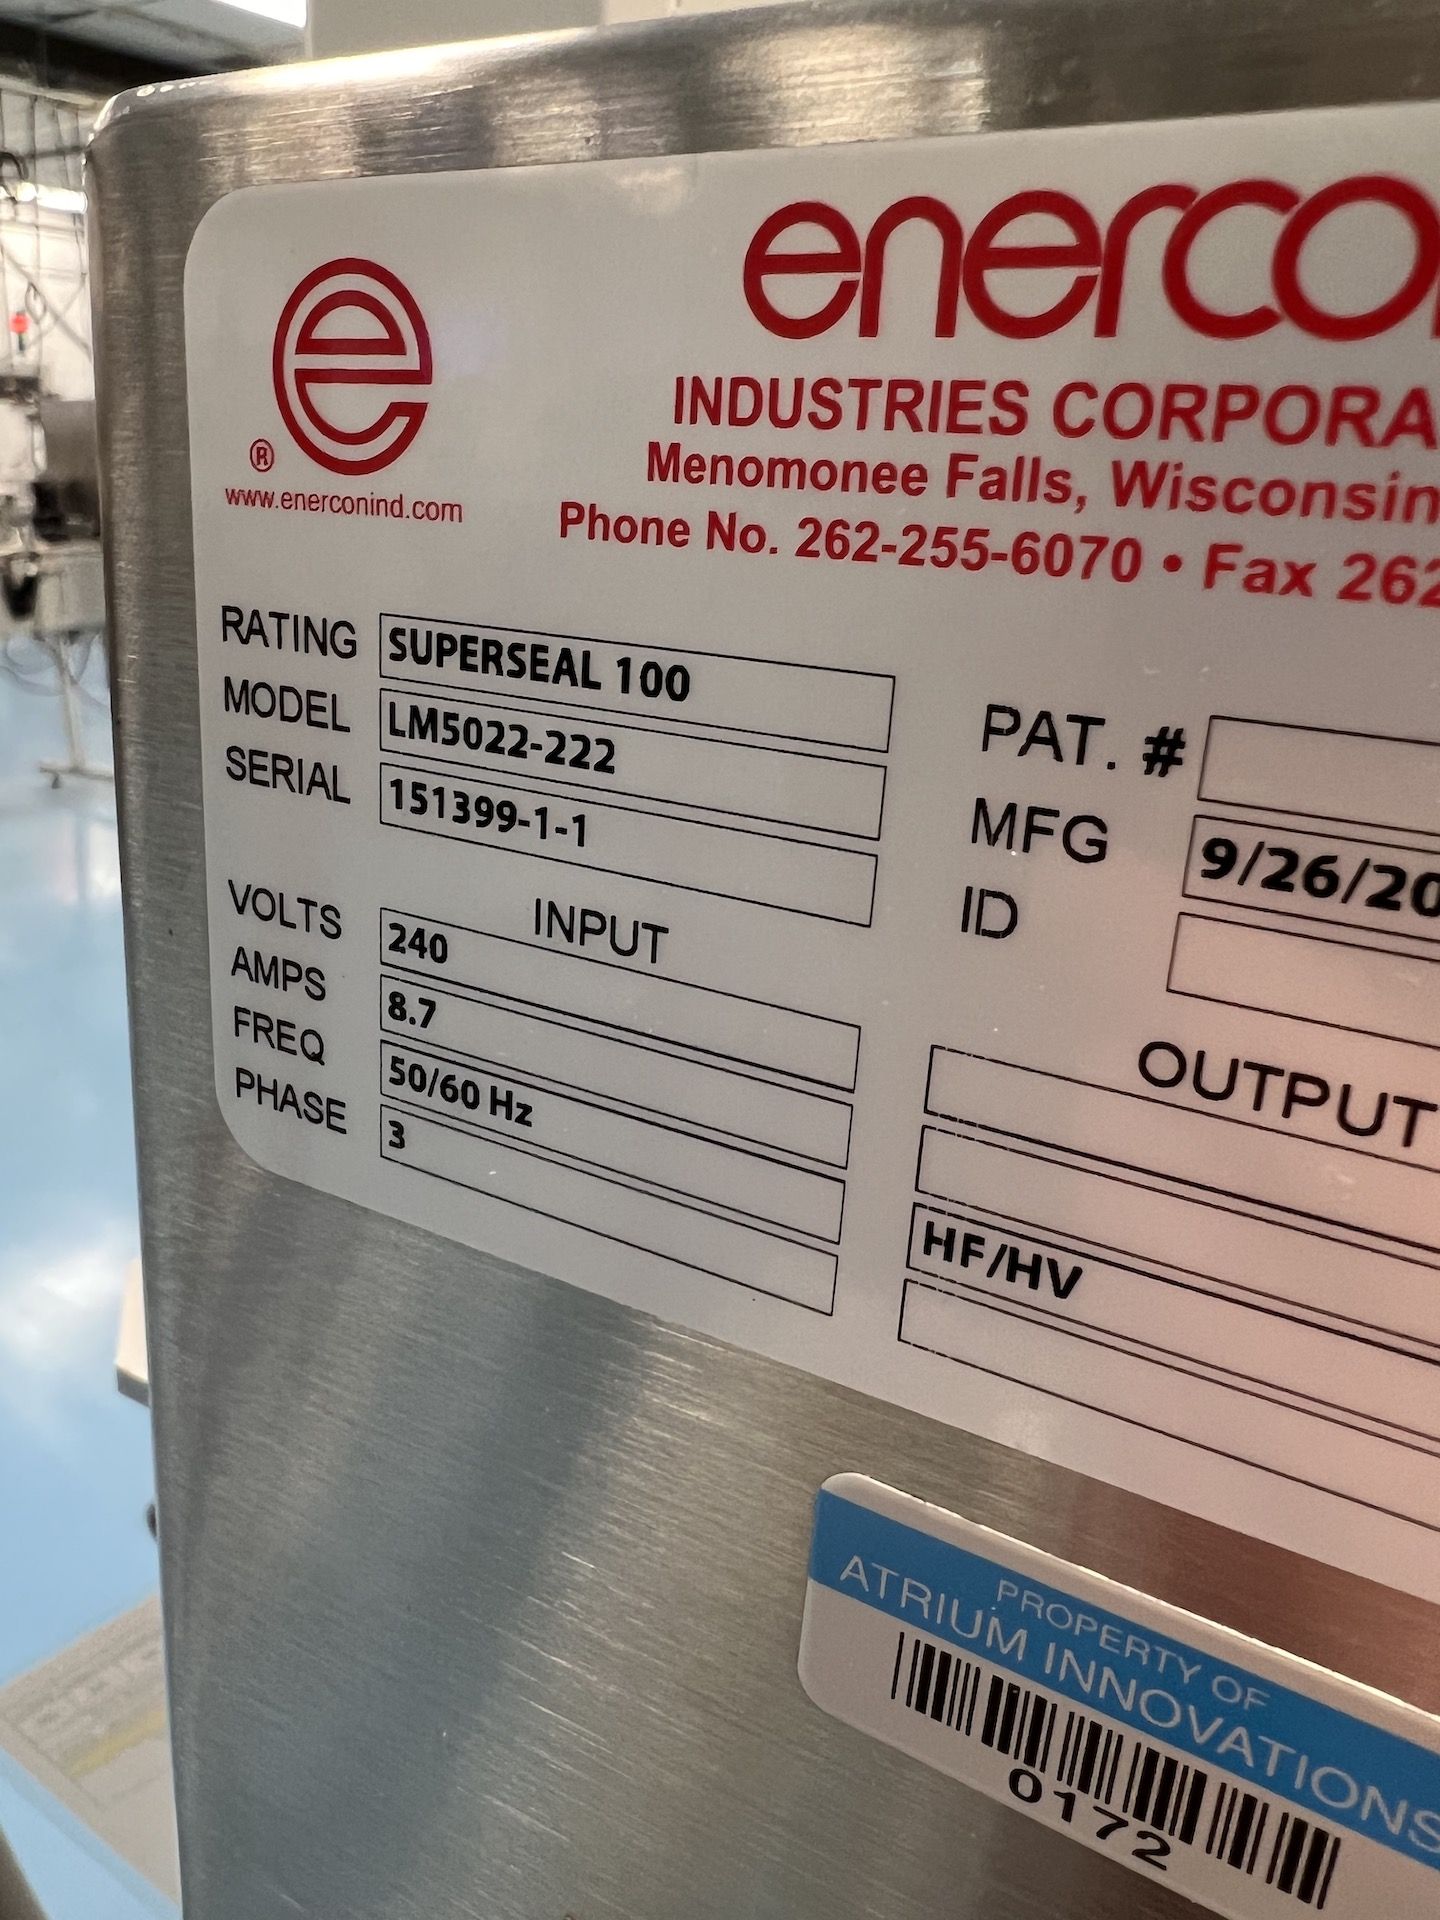 2019 ENERCON SUPERSEAL 100 INDUCTION SEALER, MODEL LM5022-222, S/N 151399-1-1, 240/3/50/60 - Image 4 of 7